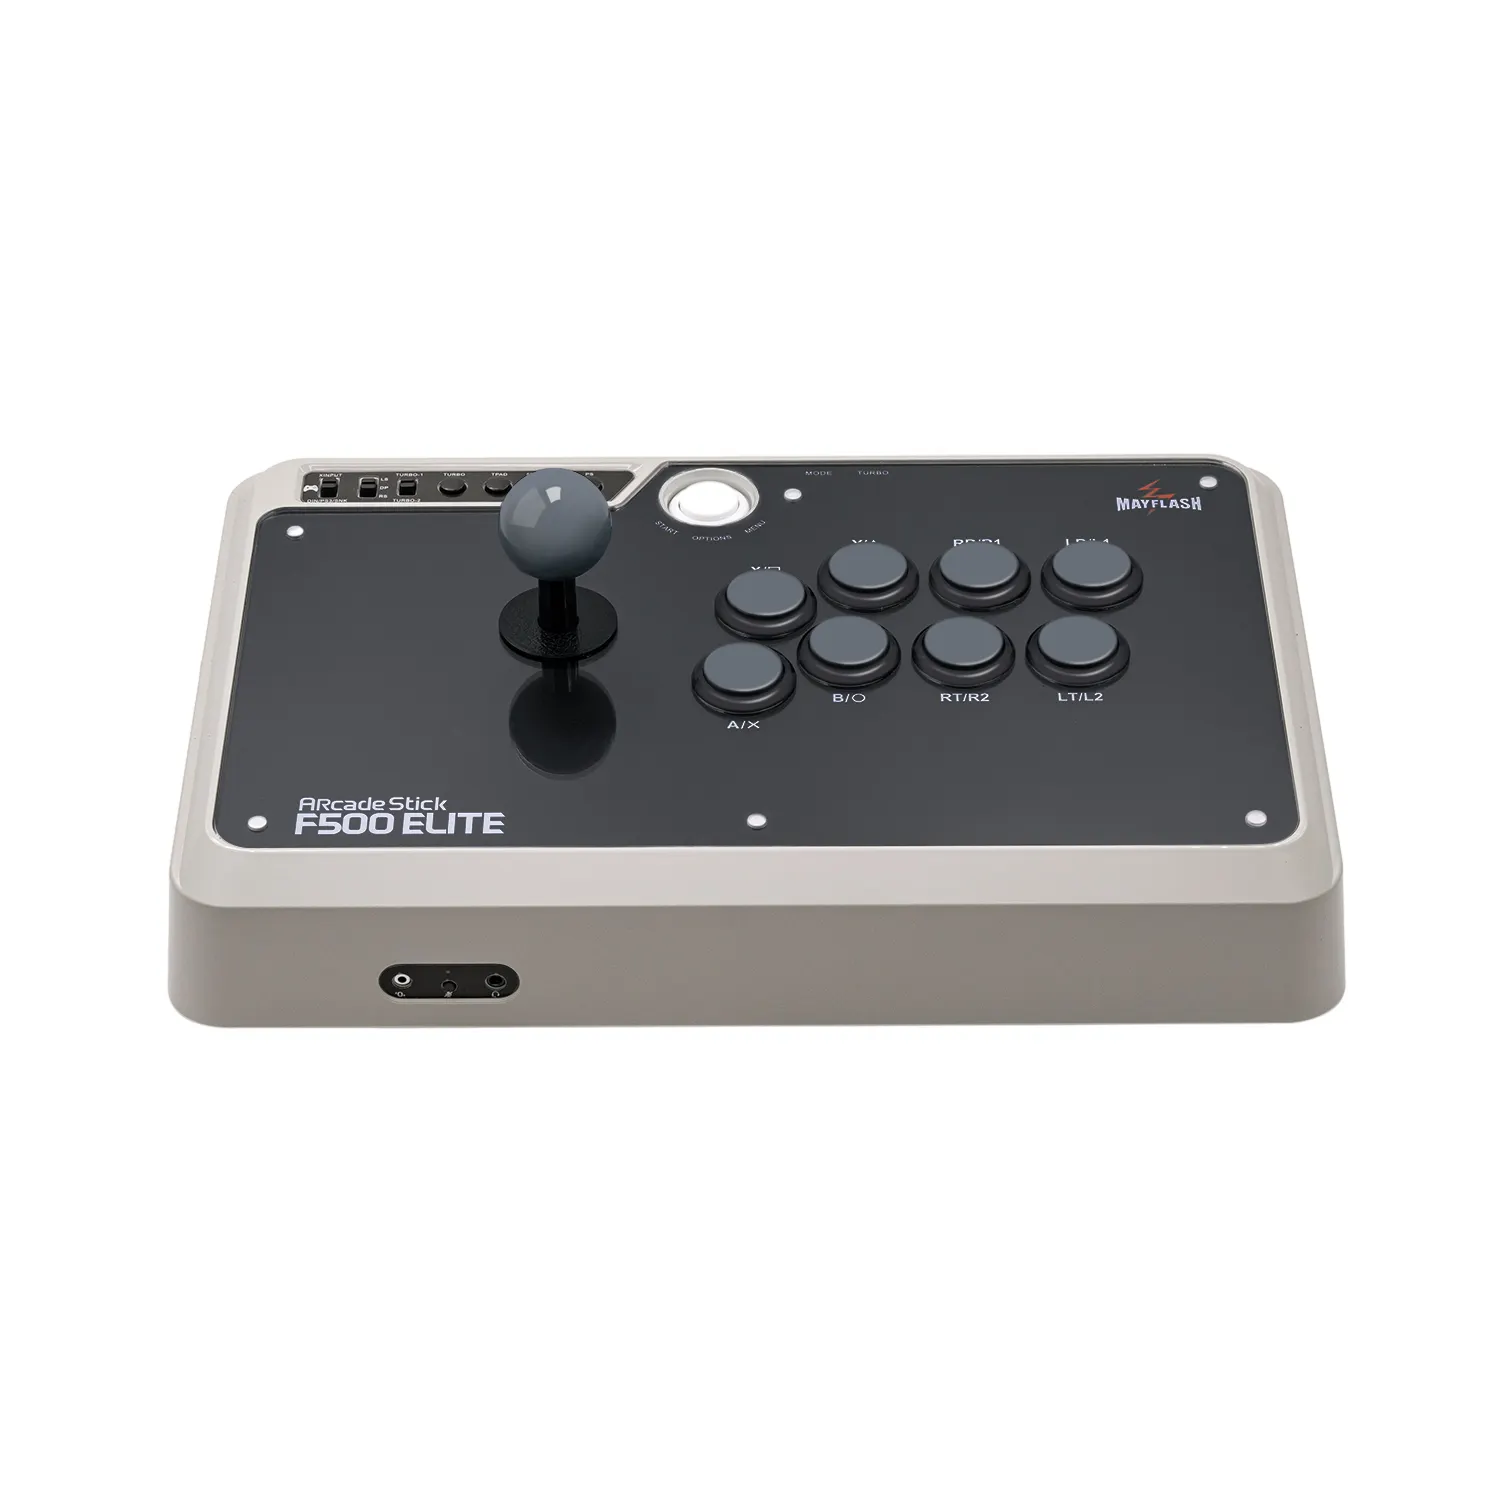 Mayflash F500 Elite Arcade Fightstick Joystick Controller Voor Ps4/Ps3/Xbox One/Xbox 360/Pc Responsieve Knoppen Gaming Accessoires